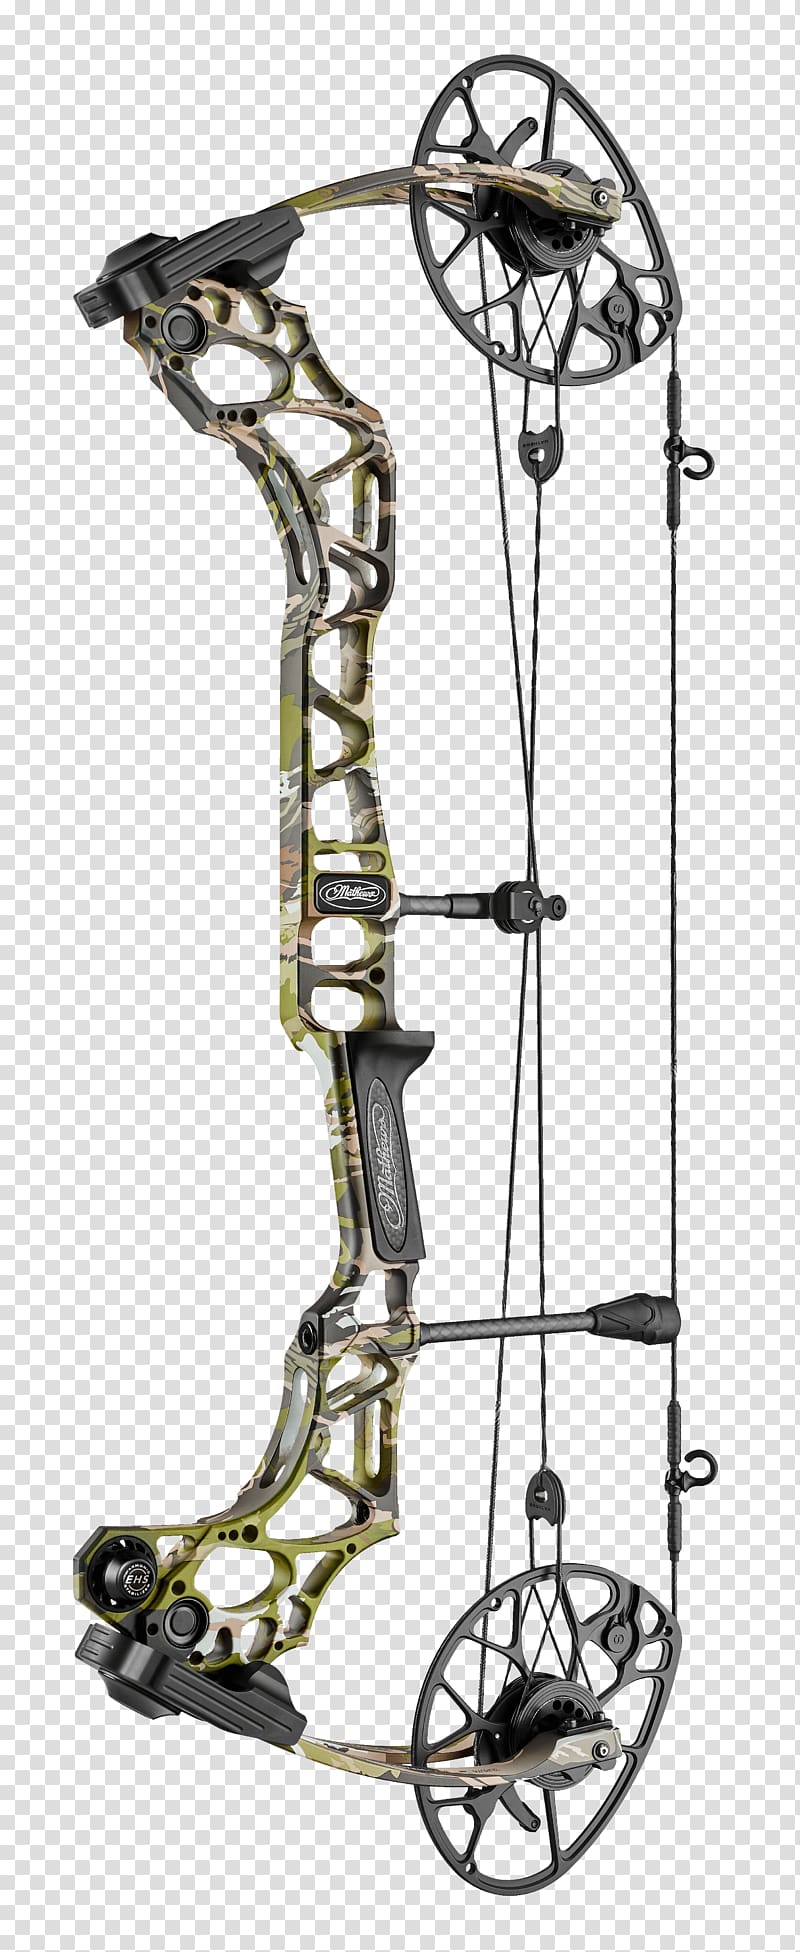 Bowhunting Pound Bows Mathews Archery Inc Bow And Arrow